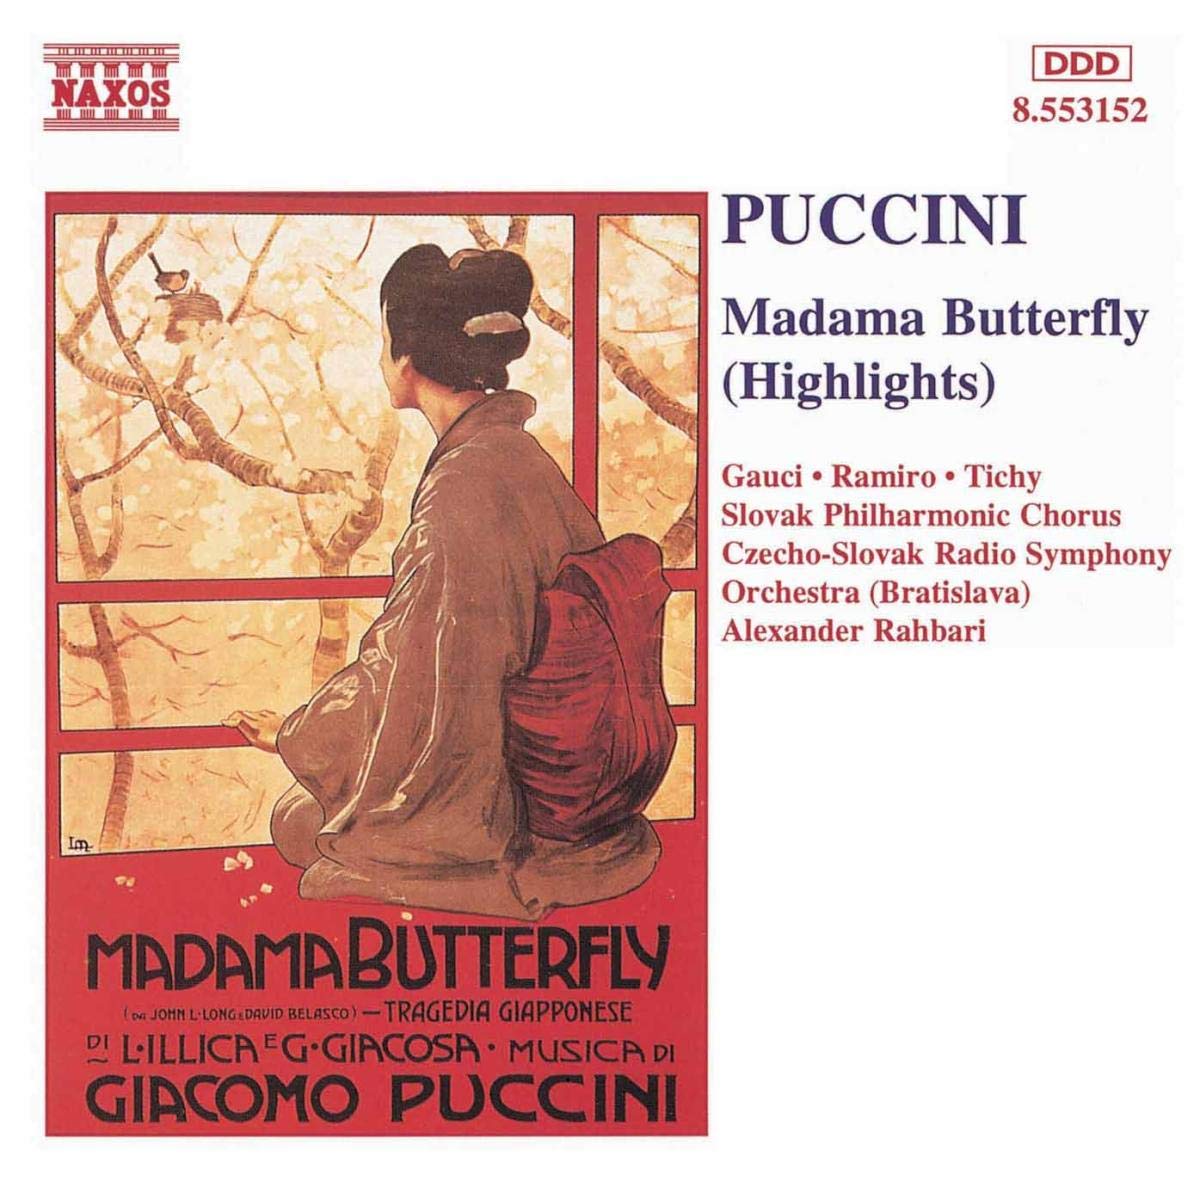 PUCCINI: Madama Butterfly ( Highlights )